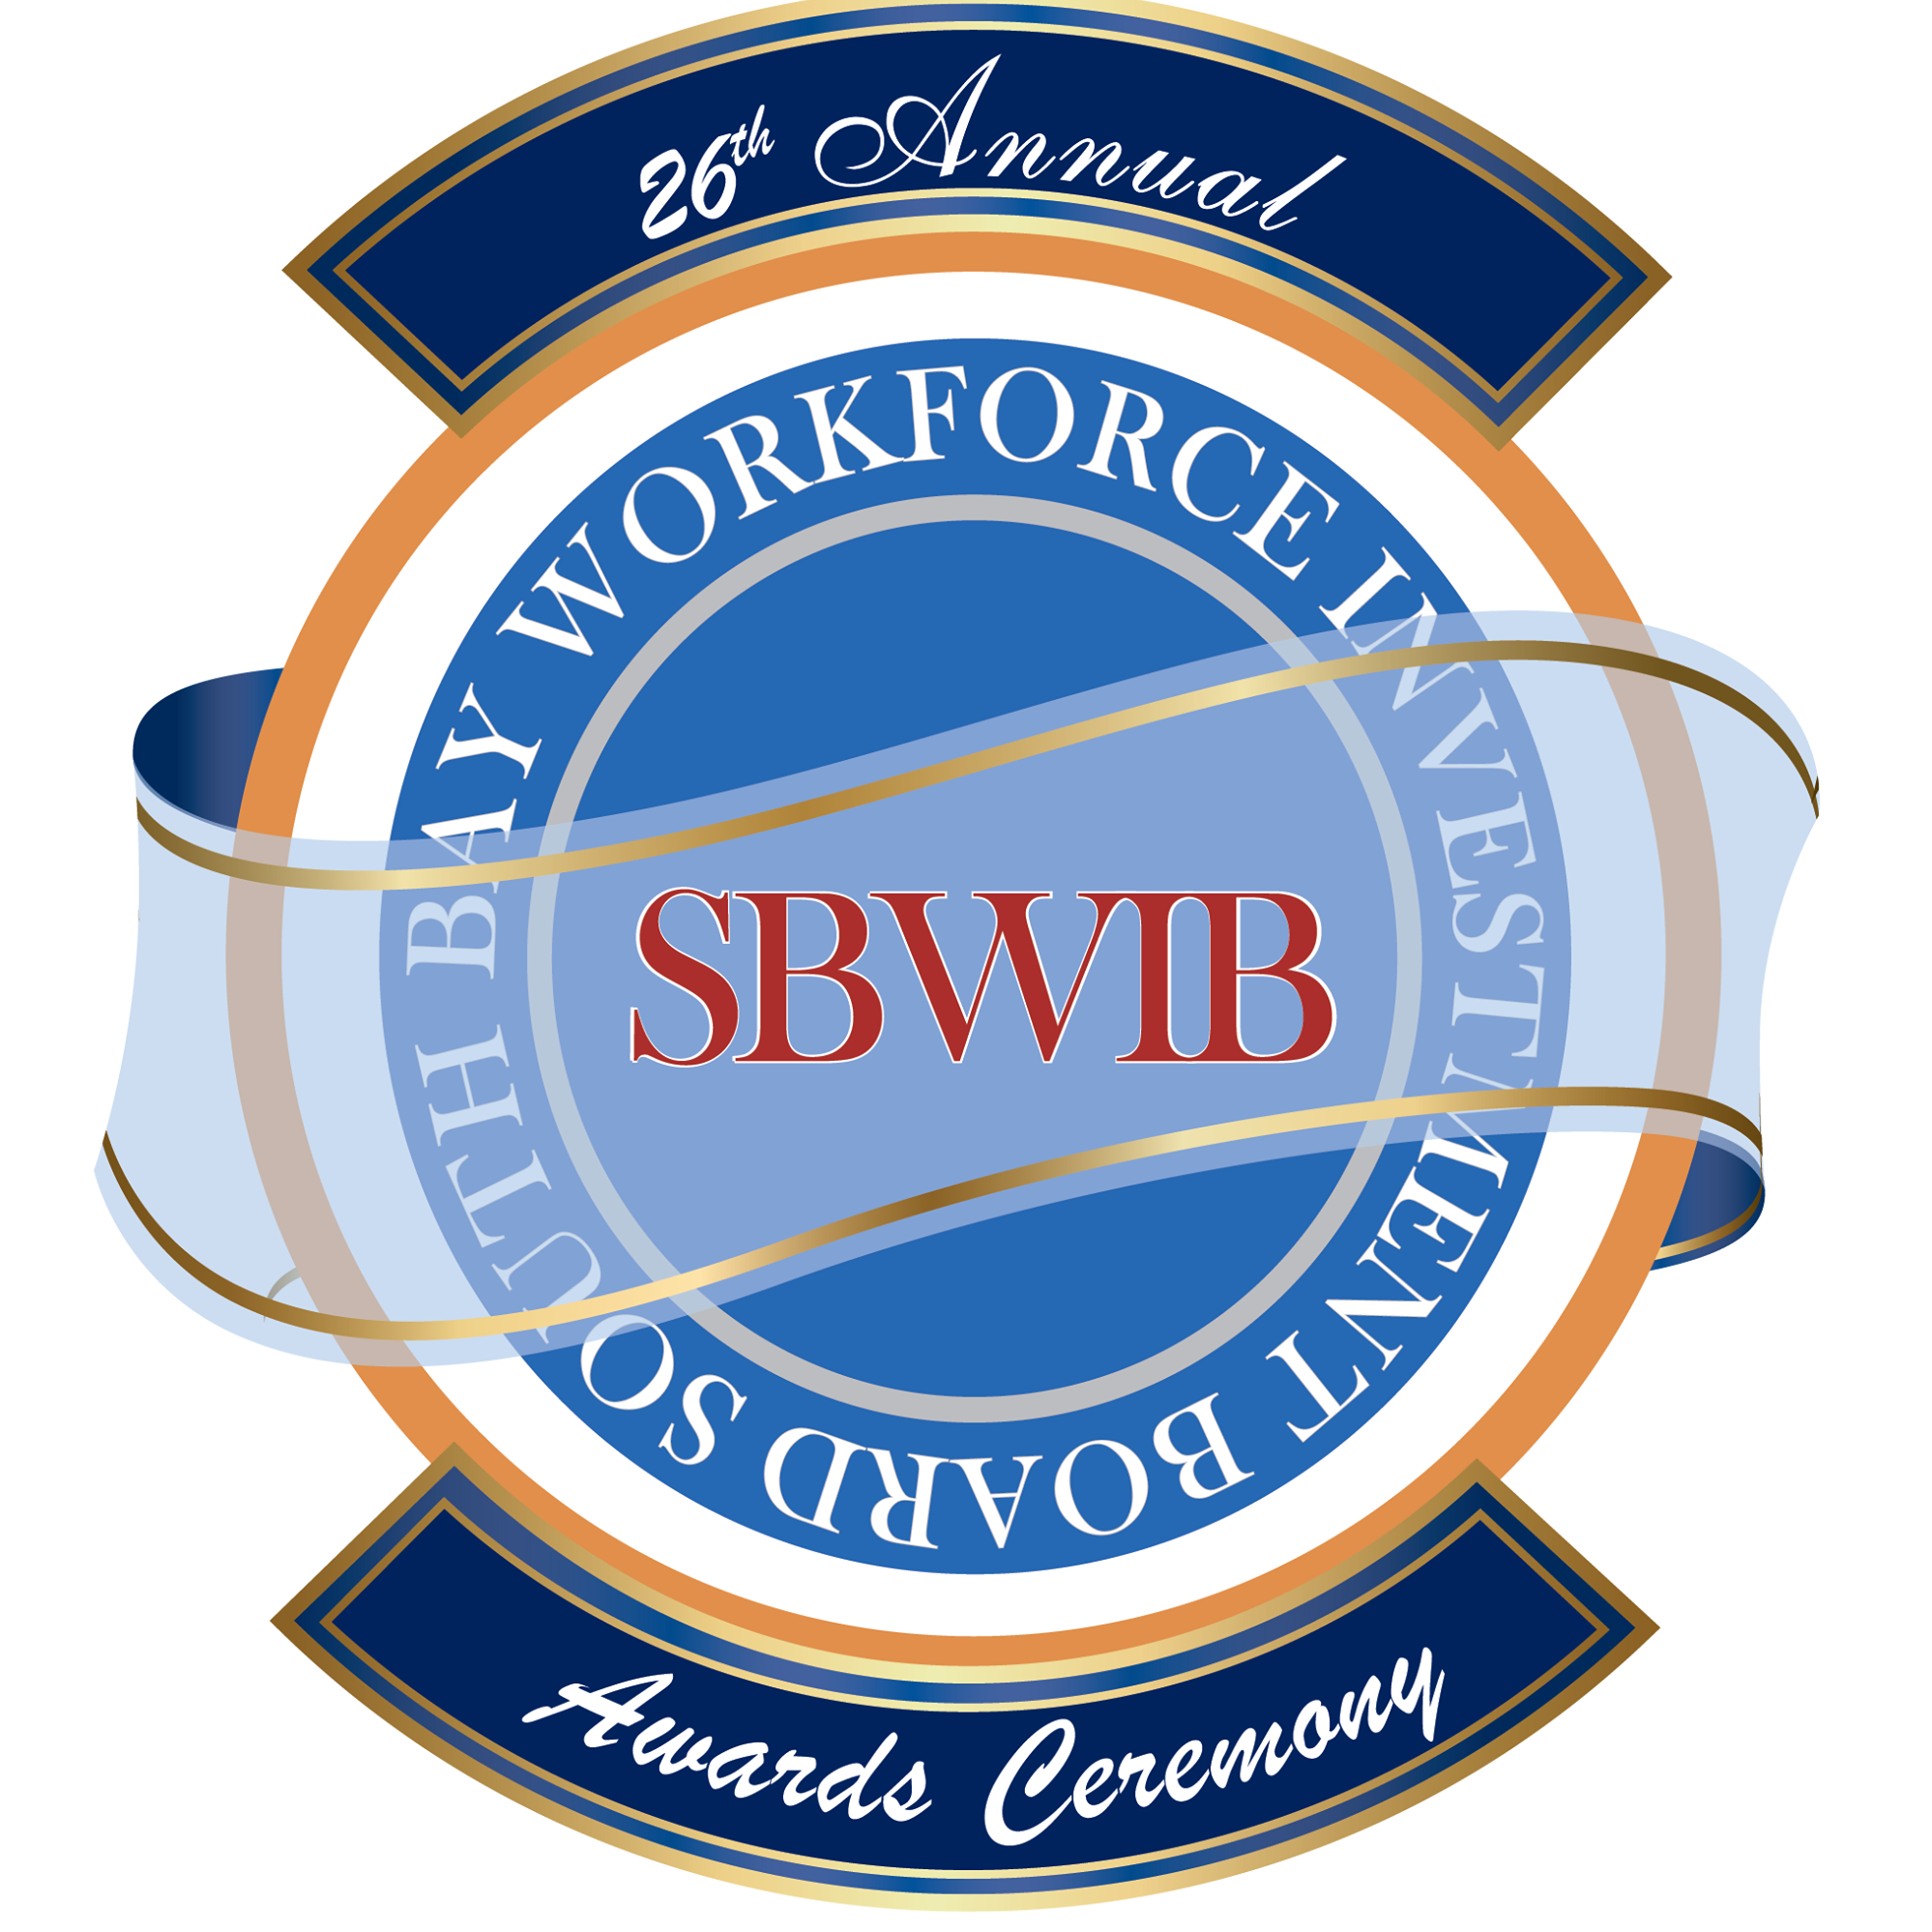 South Bay Workforce Investment Board